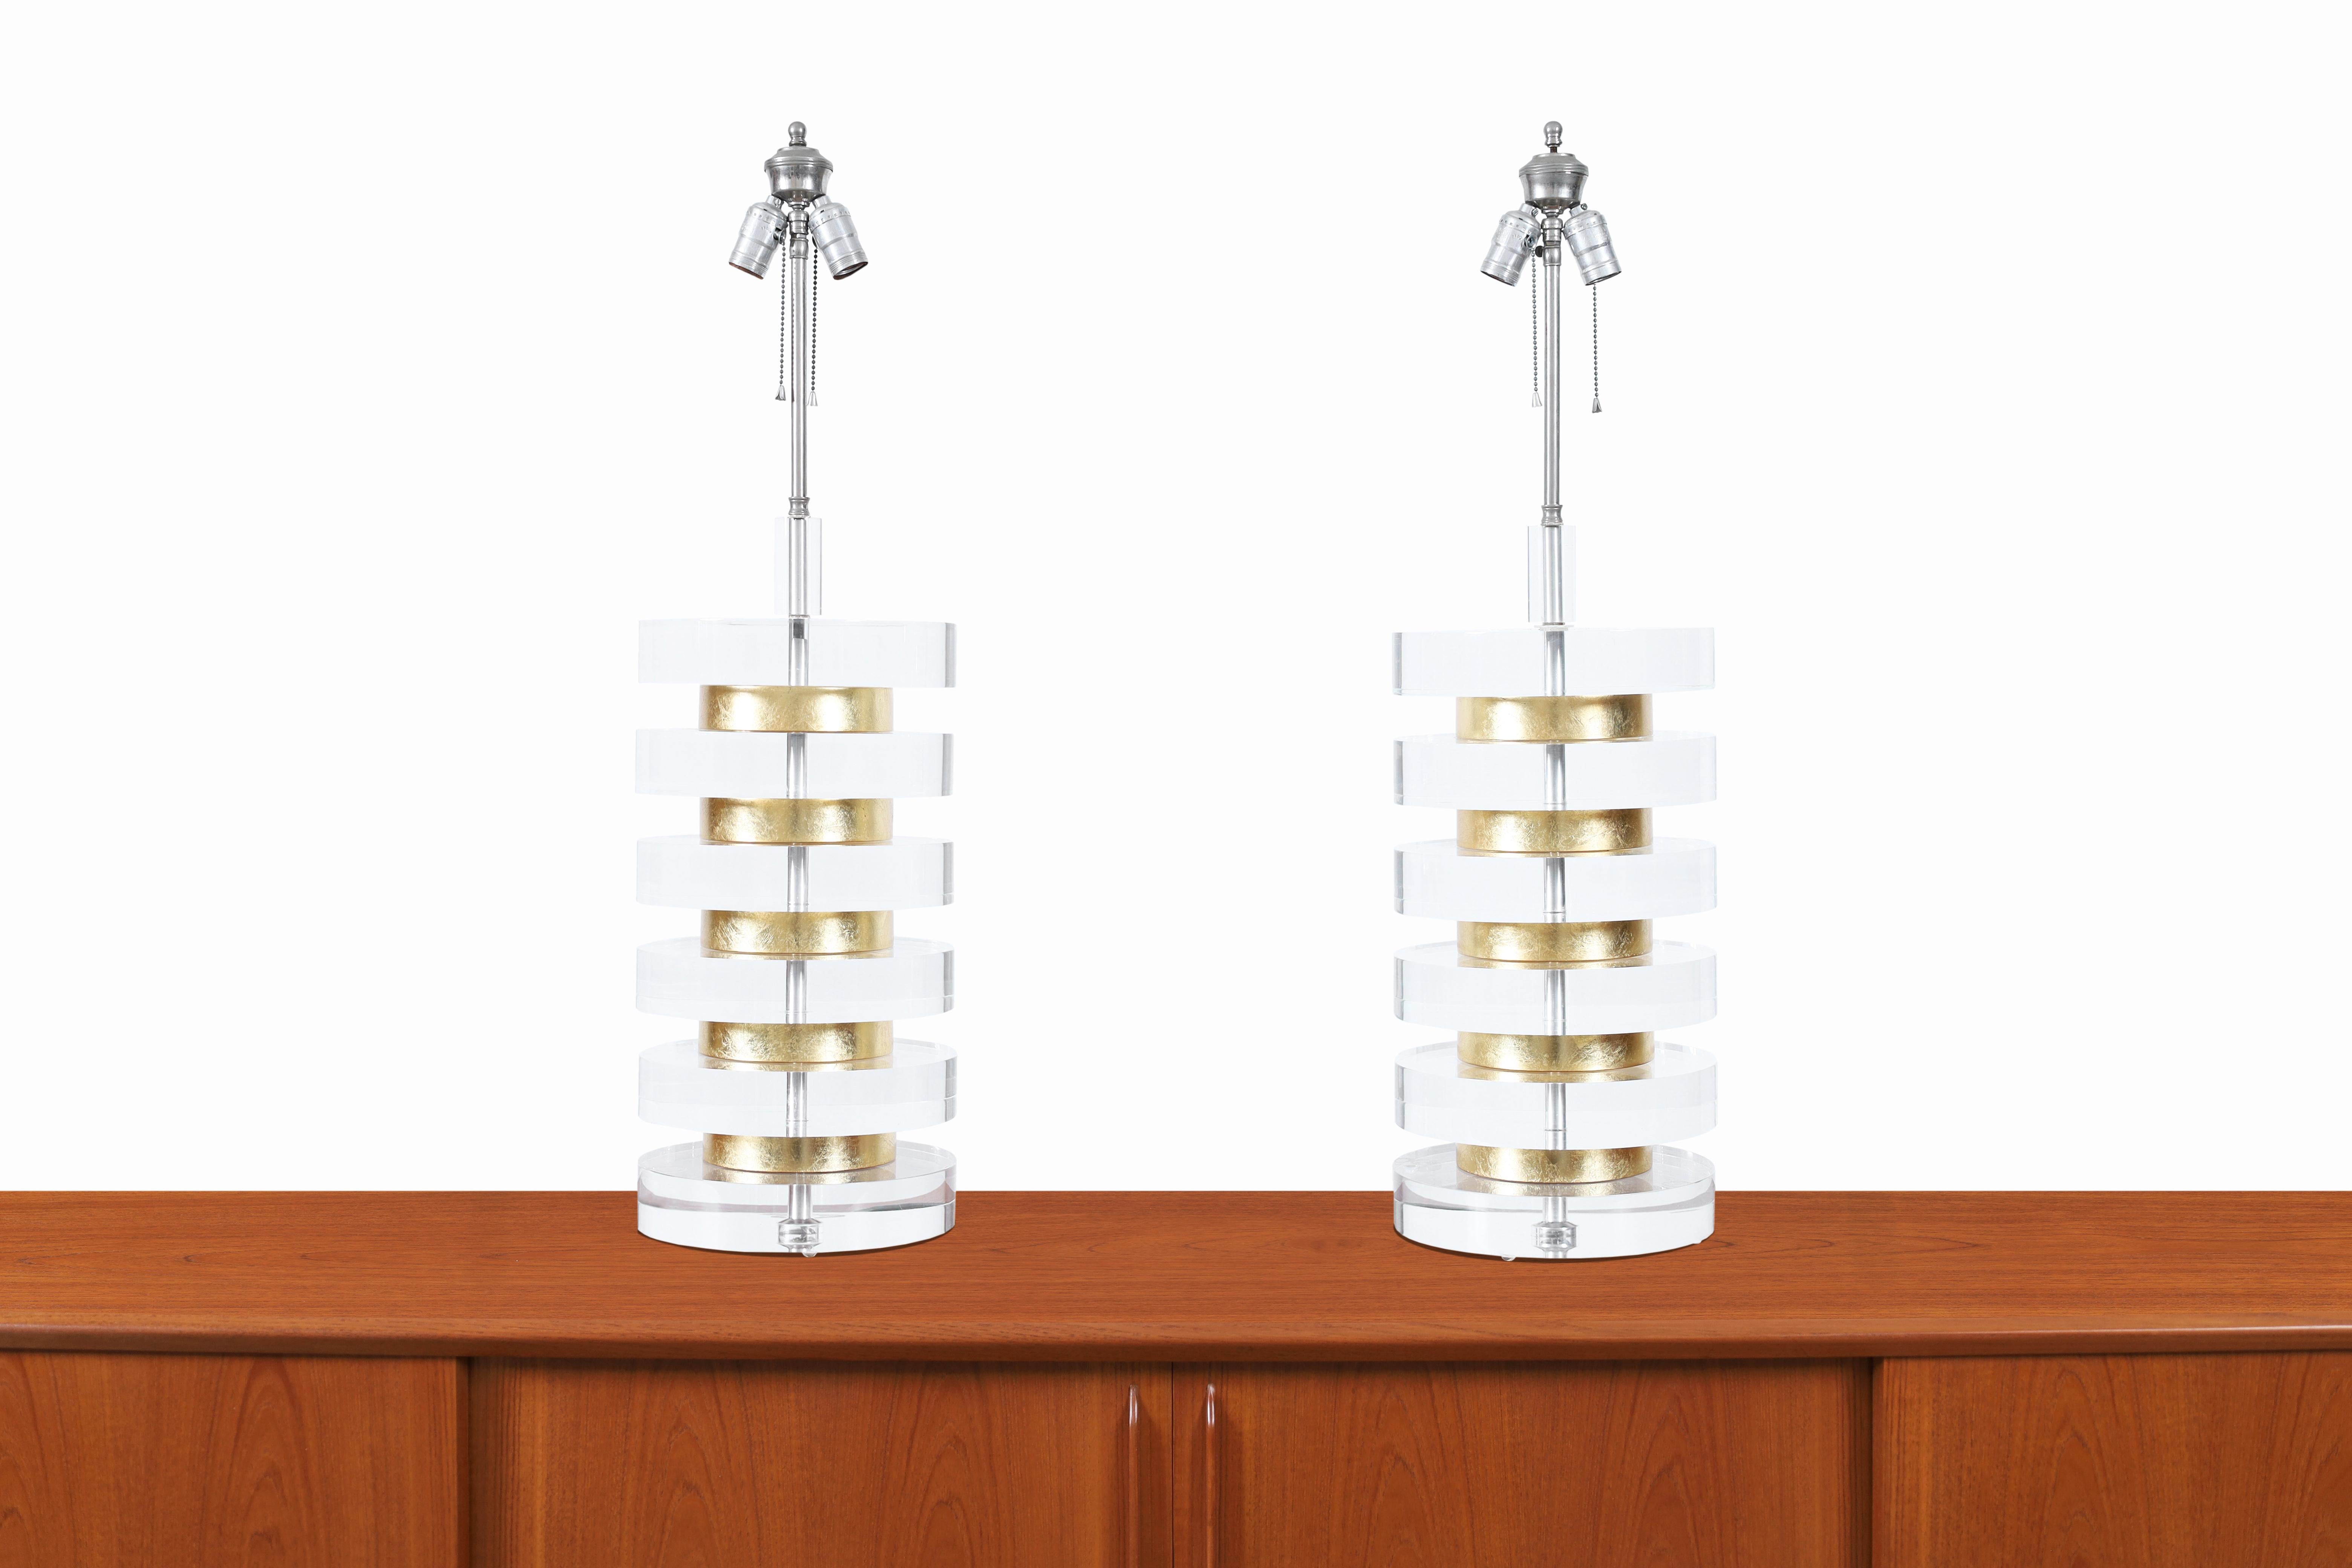 Wonderful monumental vintage lucite and gold leaf lamps designed and manufactured in the United States, circa 1970s. These lamps are inspired by the iconic designs of the famous designer Karl Springer. These lamps stand out for their modern design